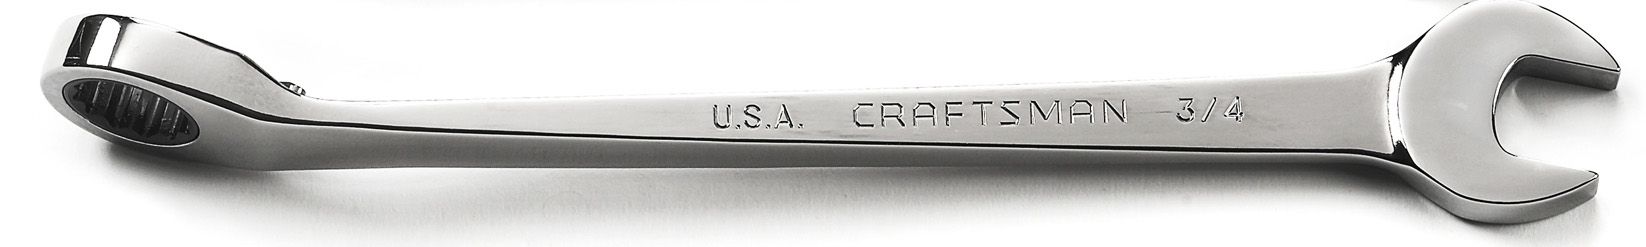 Craftsman 3/8 in. Full Polish Reversible Ratcheting 12 pt. Cross-Force Combination Wrench